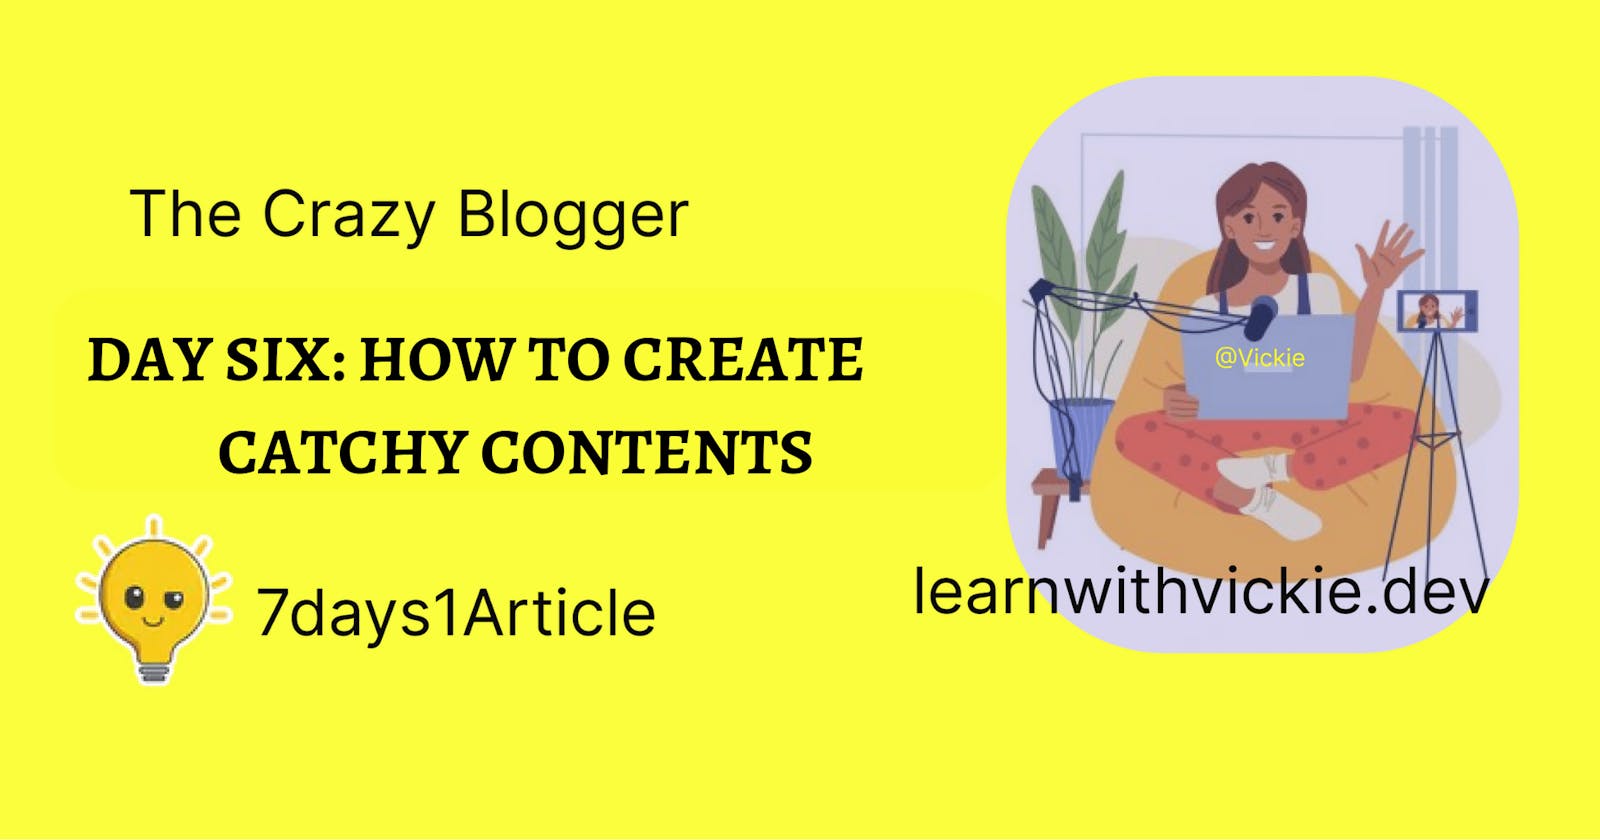 Tips to Creating Catchy Contents